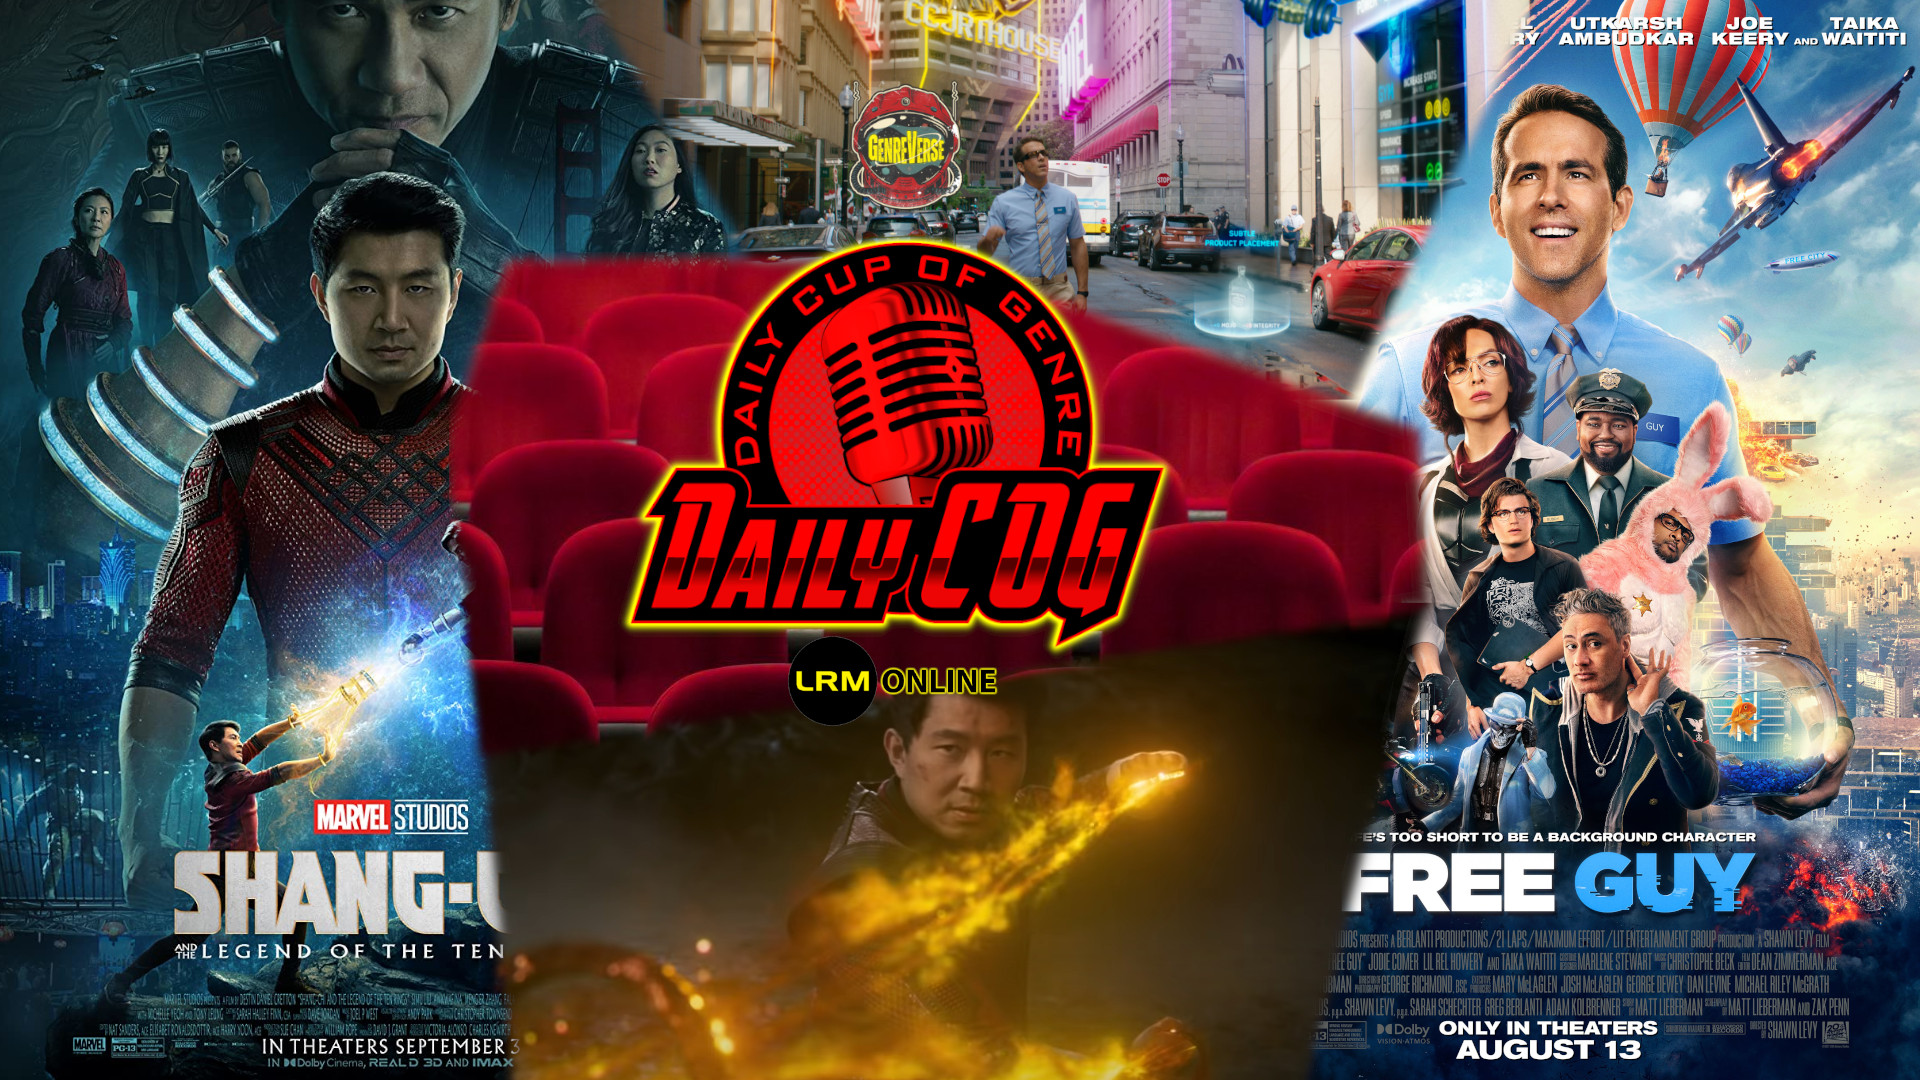 Free Guy 1UPs At The Box Office & Shang-Chi Actor Simu Lui Strikes At Disney's Experiment Comments | Daily COG